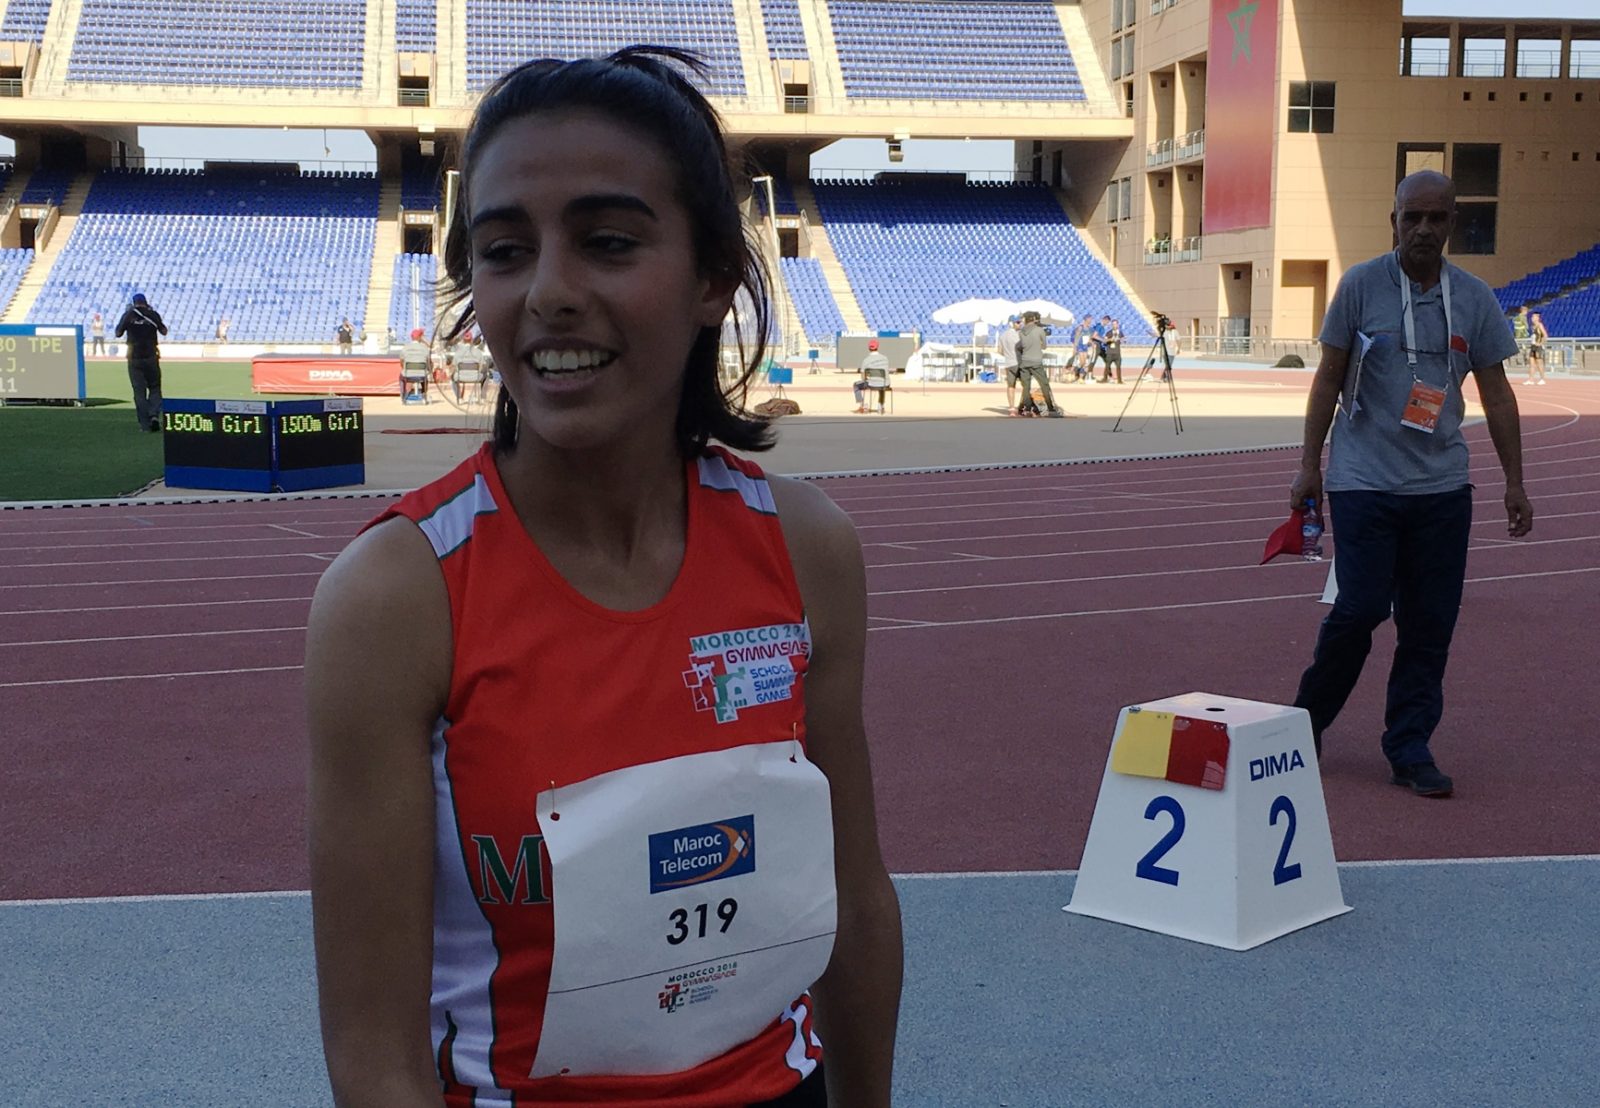 Morocco's Yassmine Bidkane all smiles after winning the Girls 1500m at the Gymnasiade 2018 in Marrakech / Photo Credit: Yomi Omogbeja